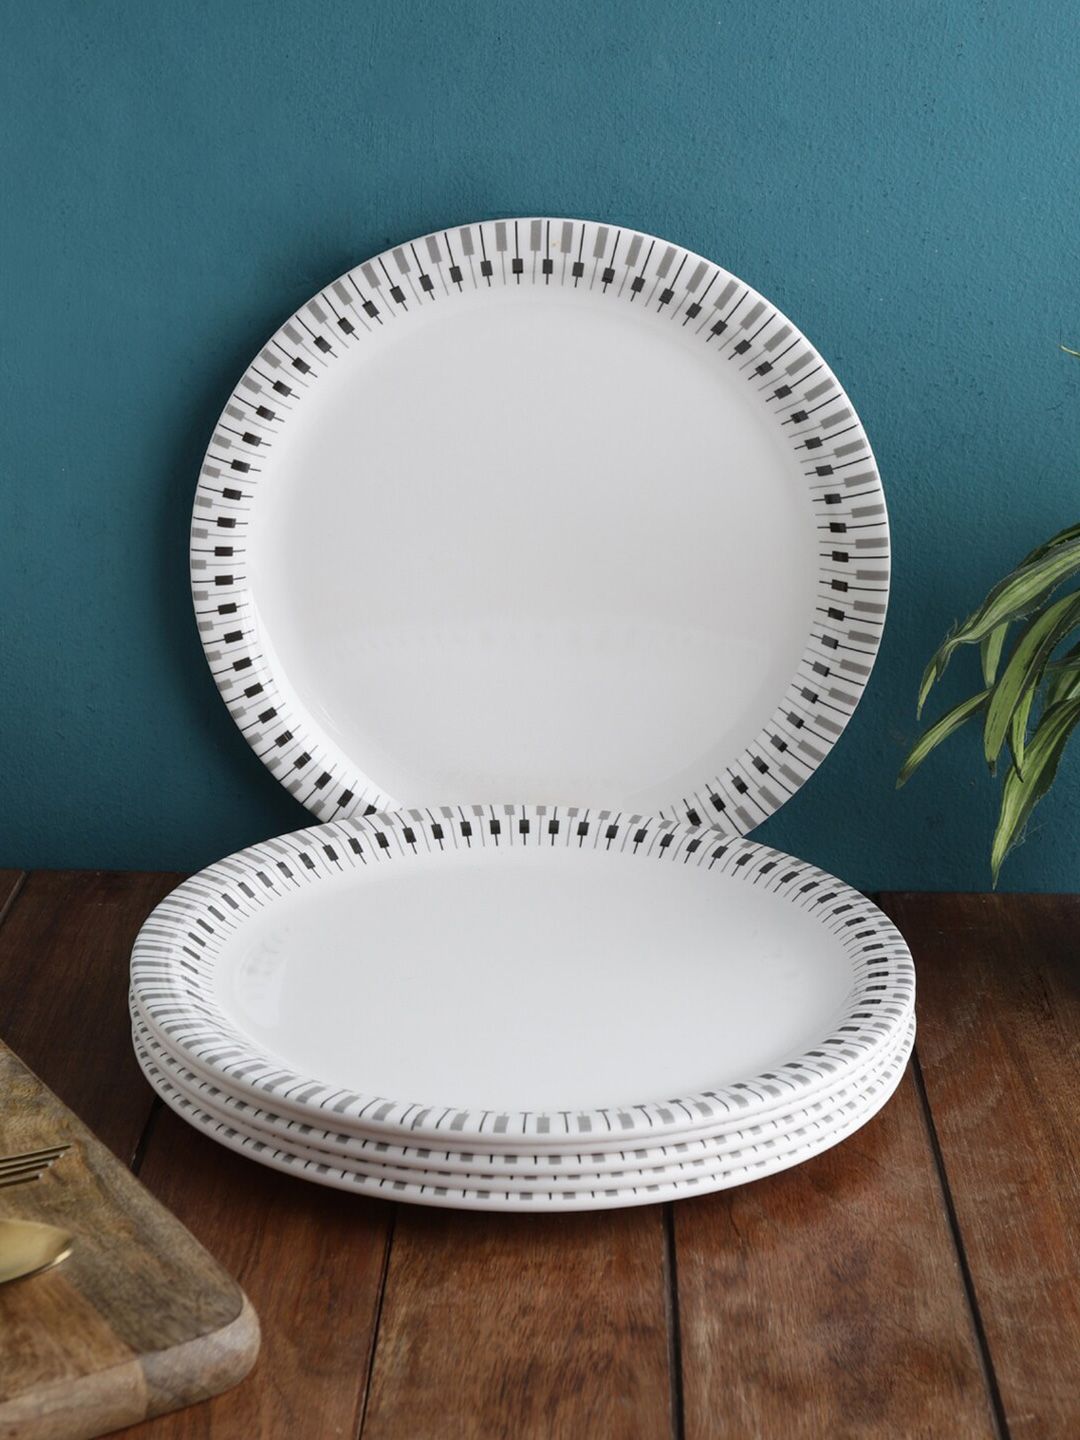 Servewell White & Black 6 Pieces Geometric Printed Melamine Glossy Dinner Plates Price in India